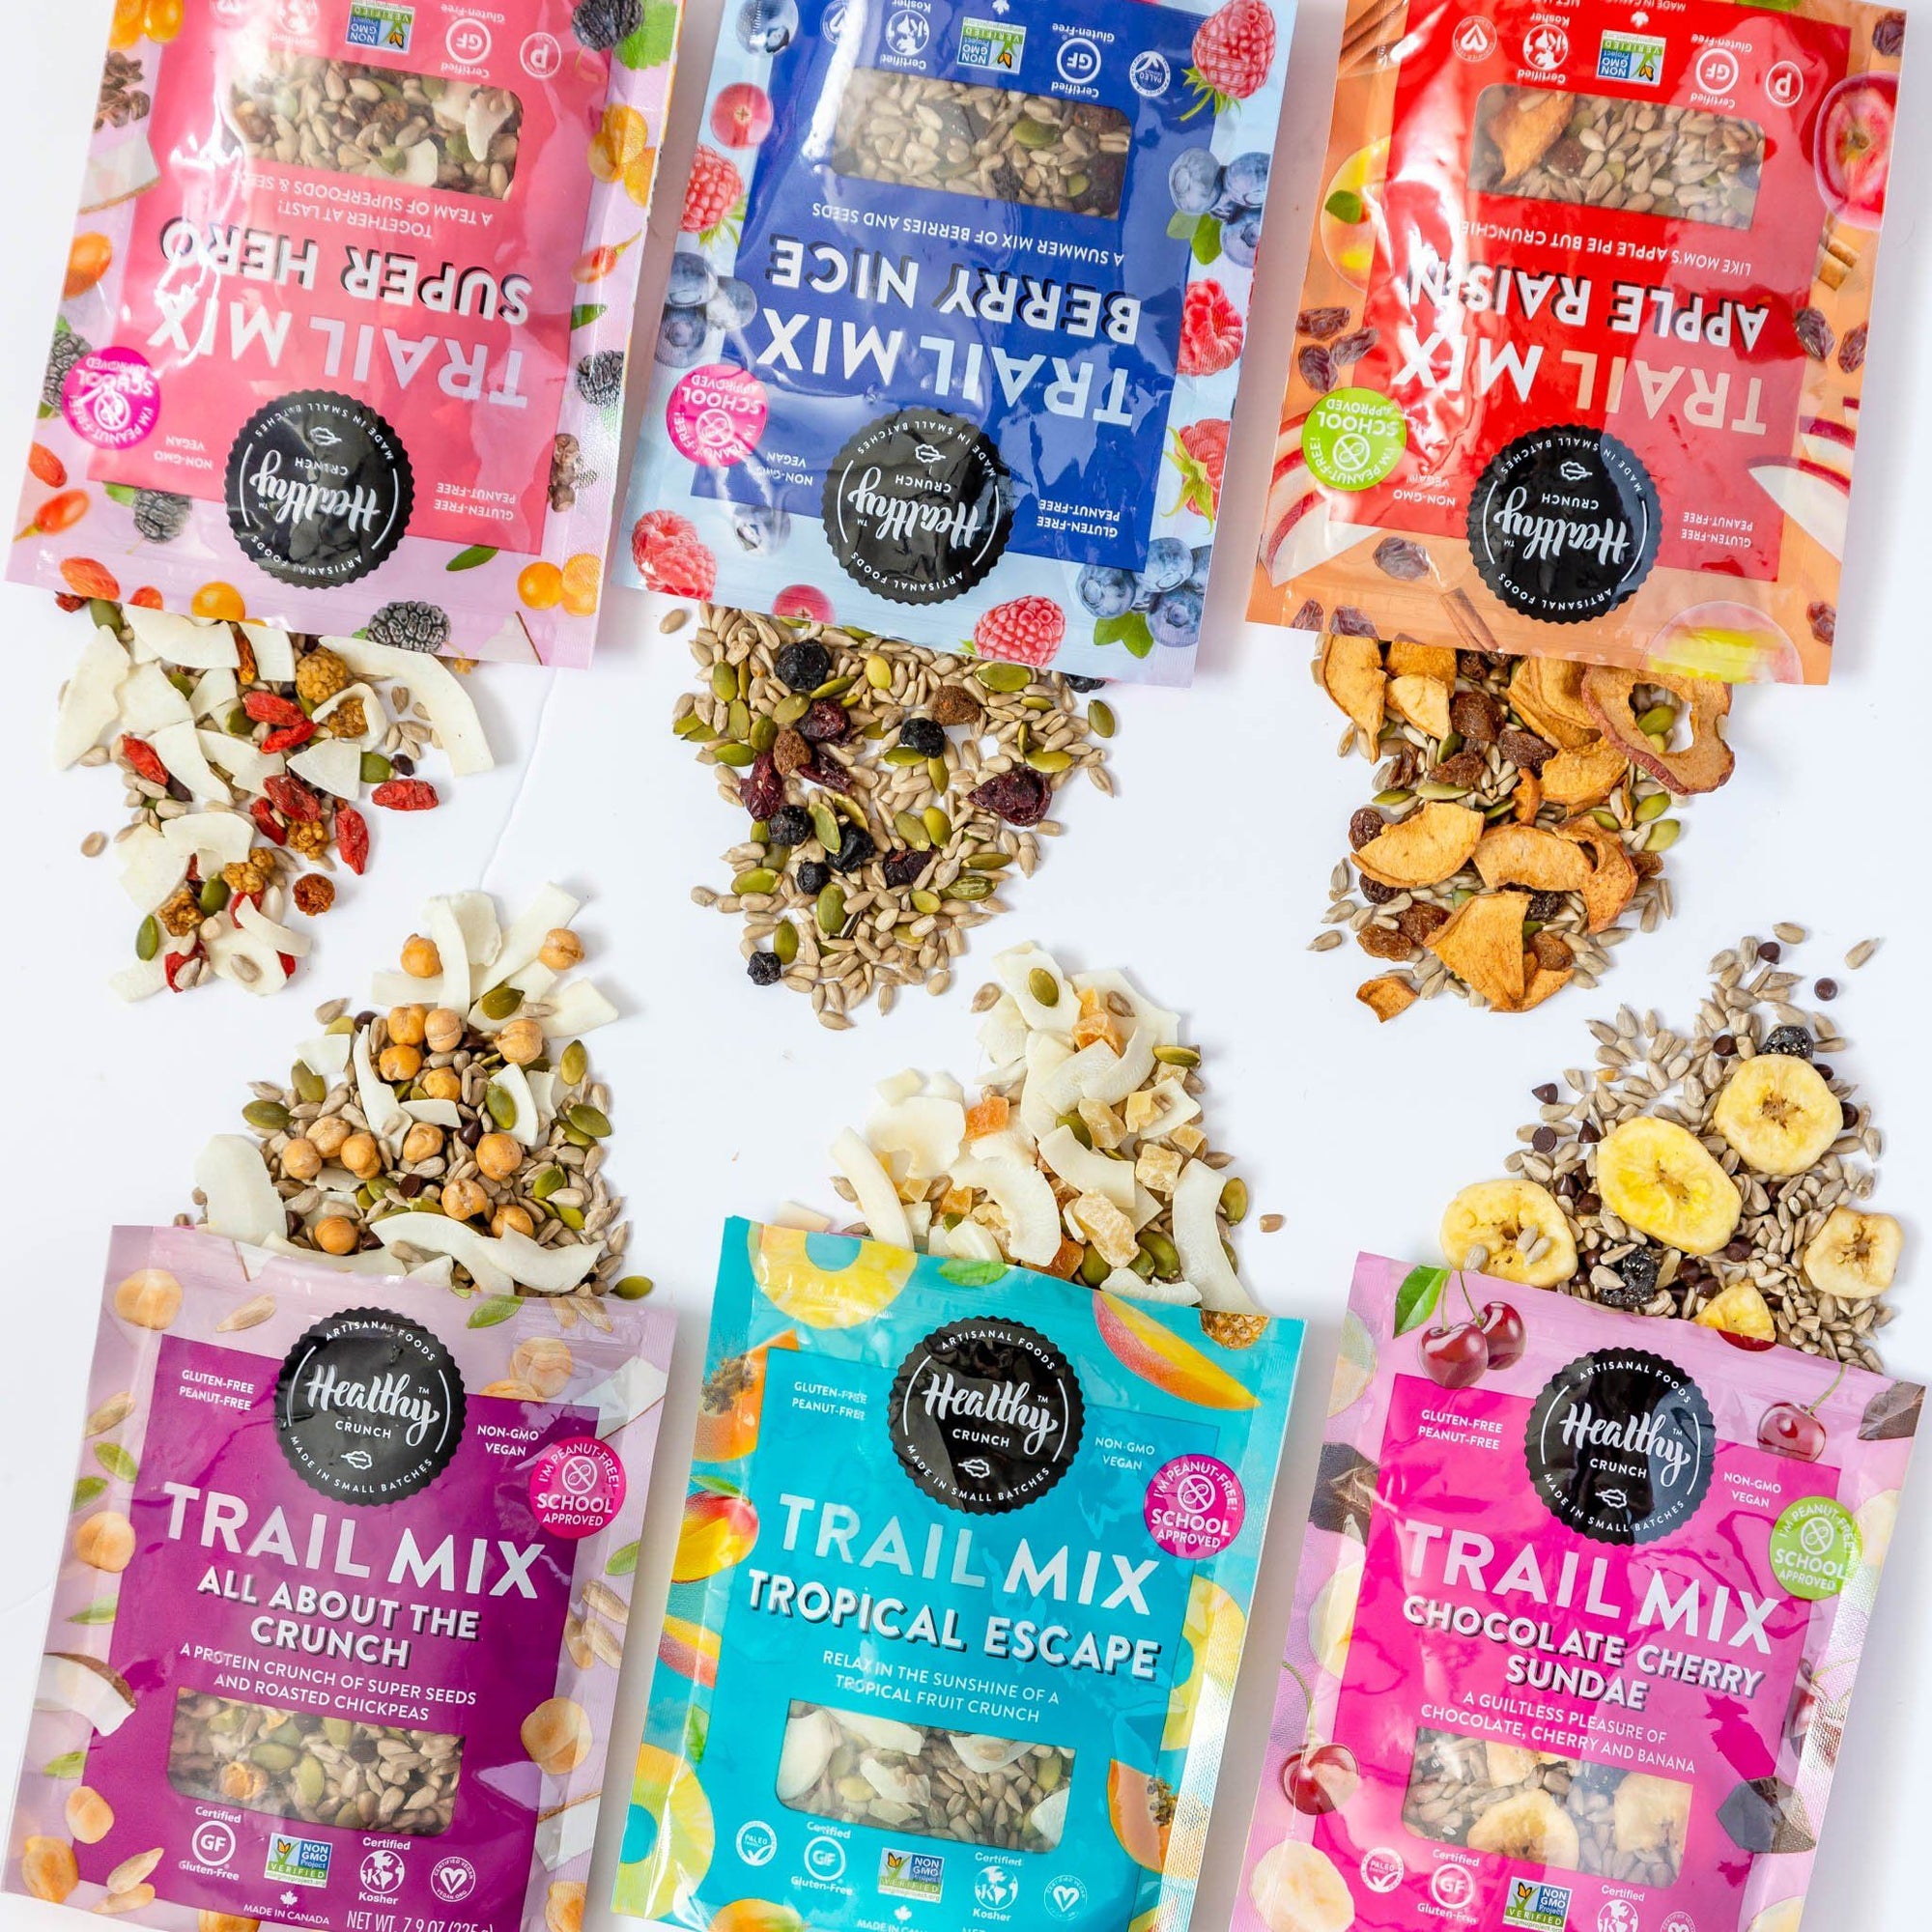 Healthy Crunch prepares for Canadian launch of snacks